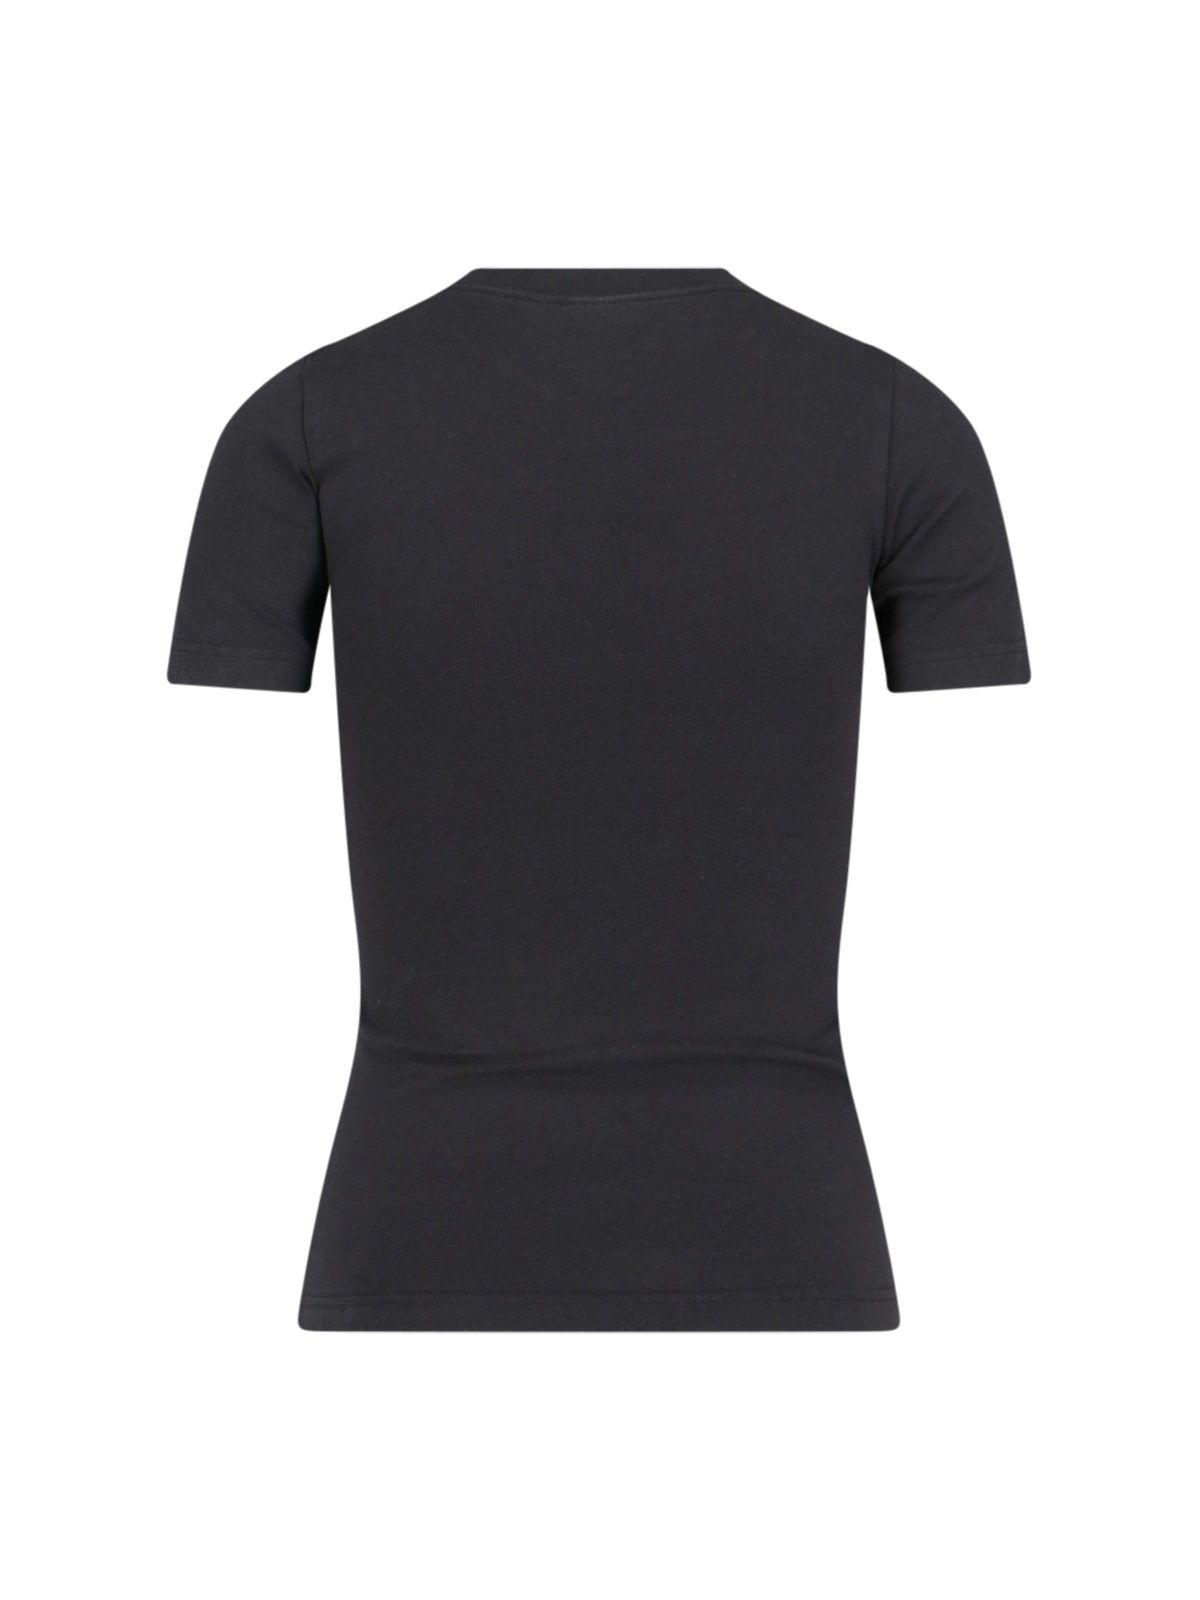 T-shirt in jersey stretch "Activewear"